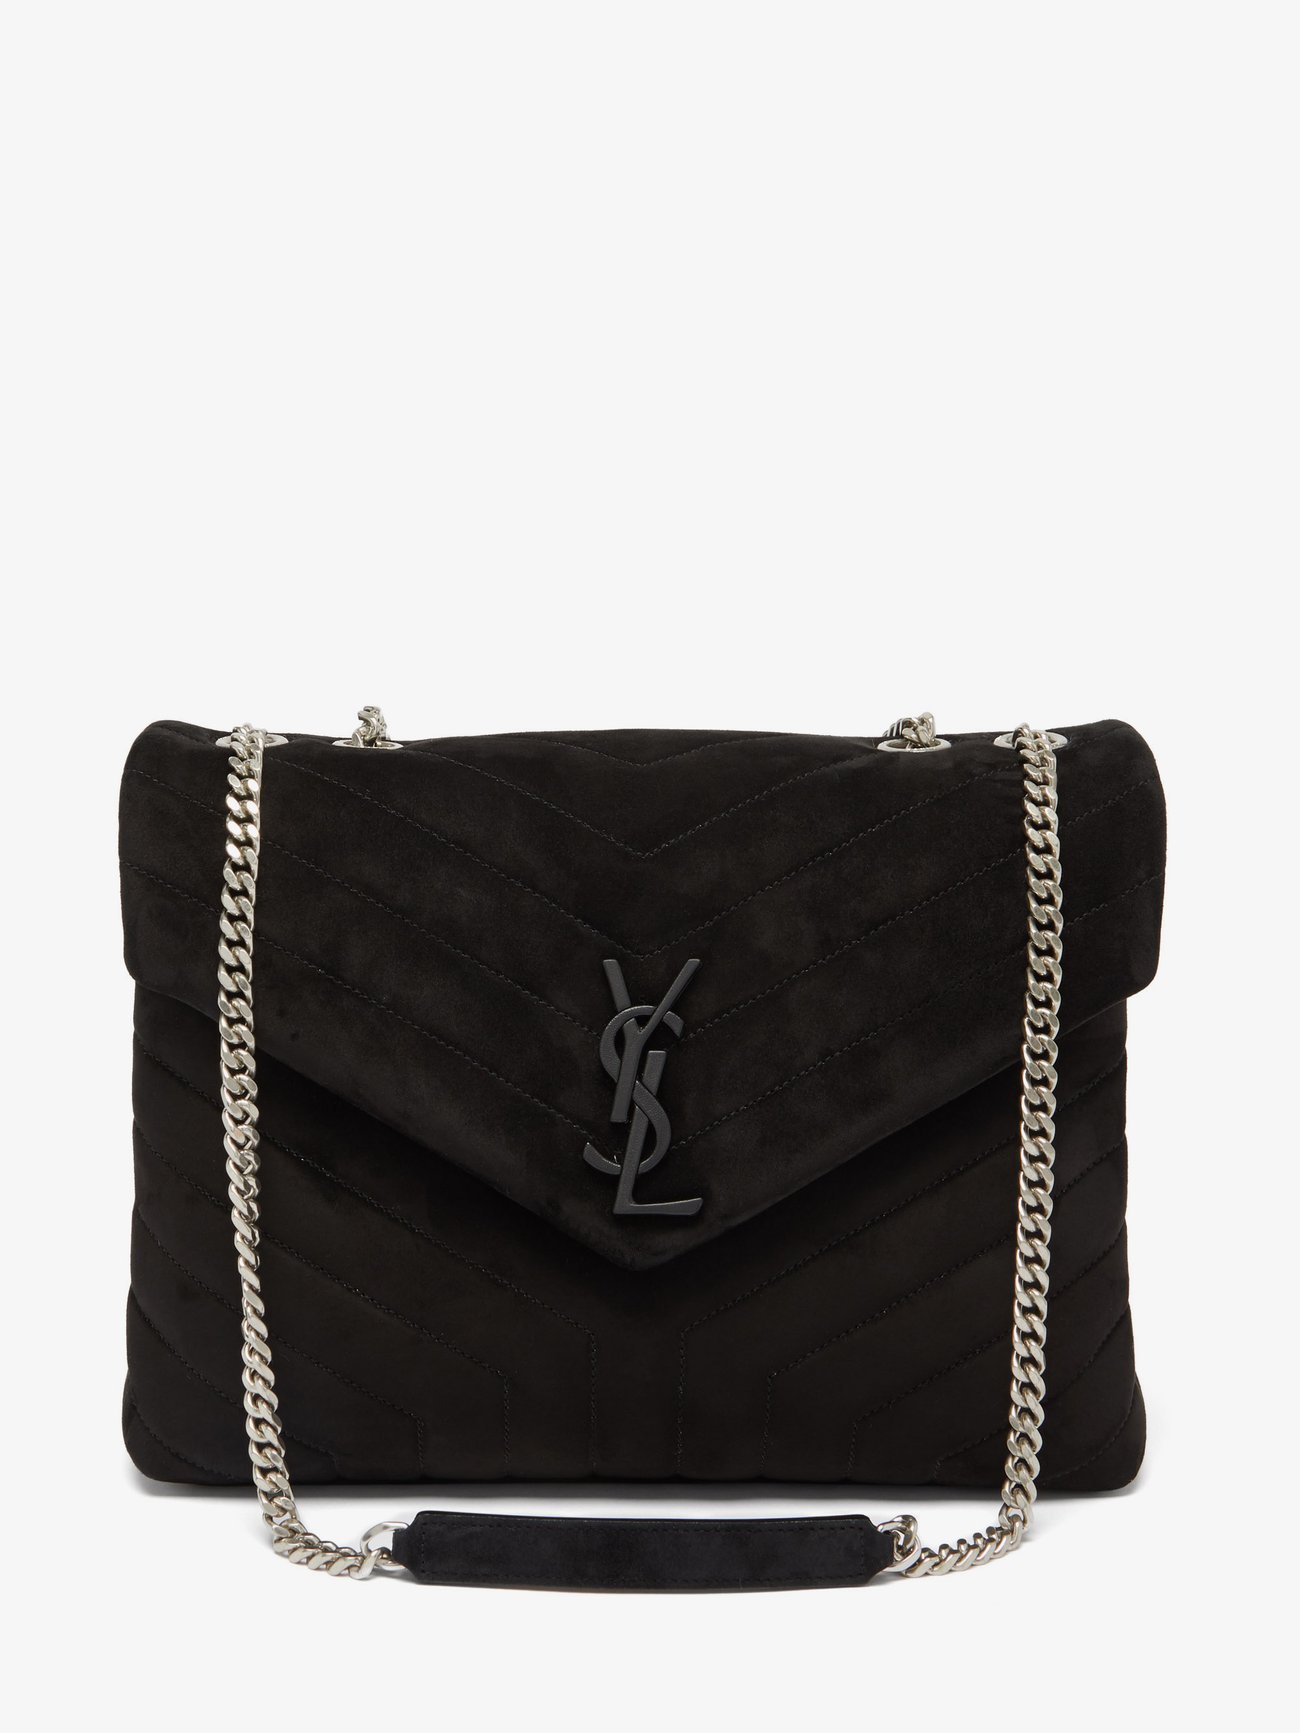 SAINT LAURENT Loulou small quilted suede shoulder bag